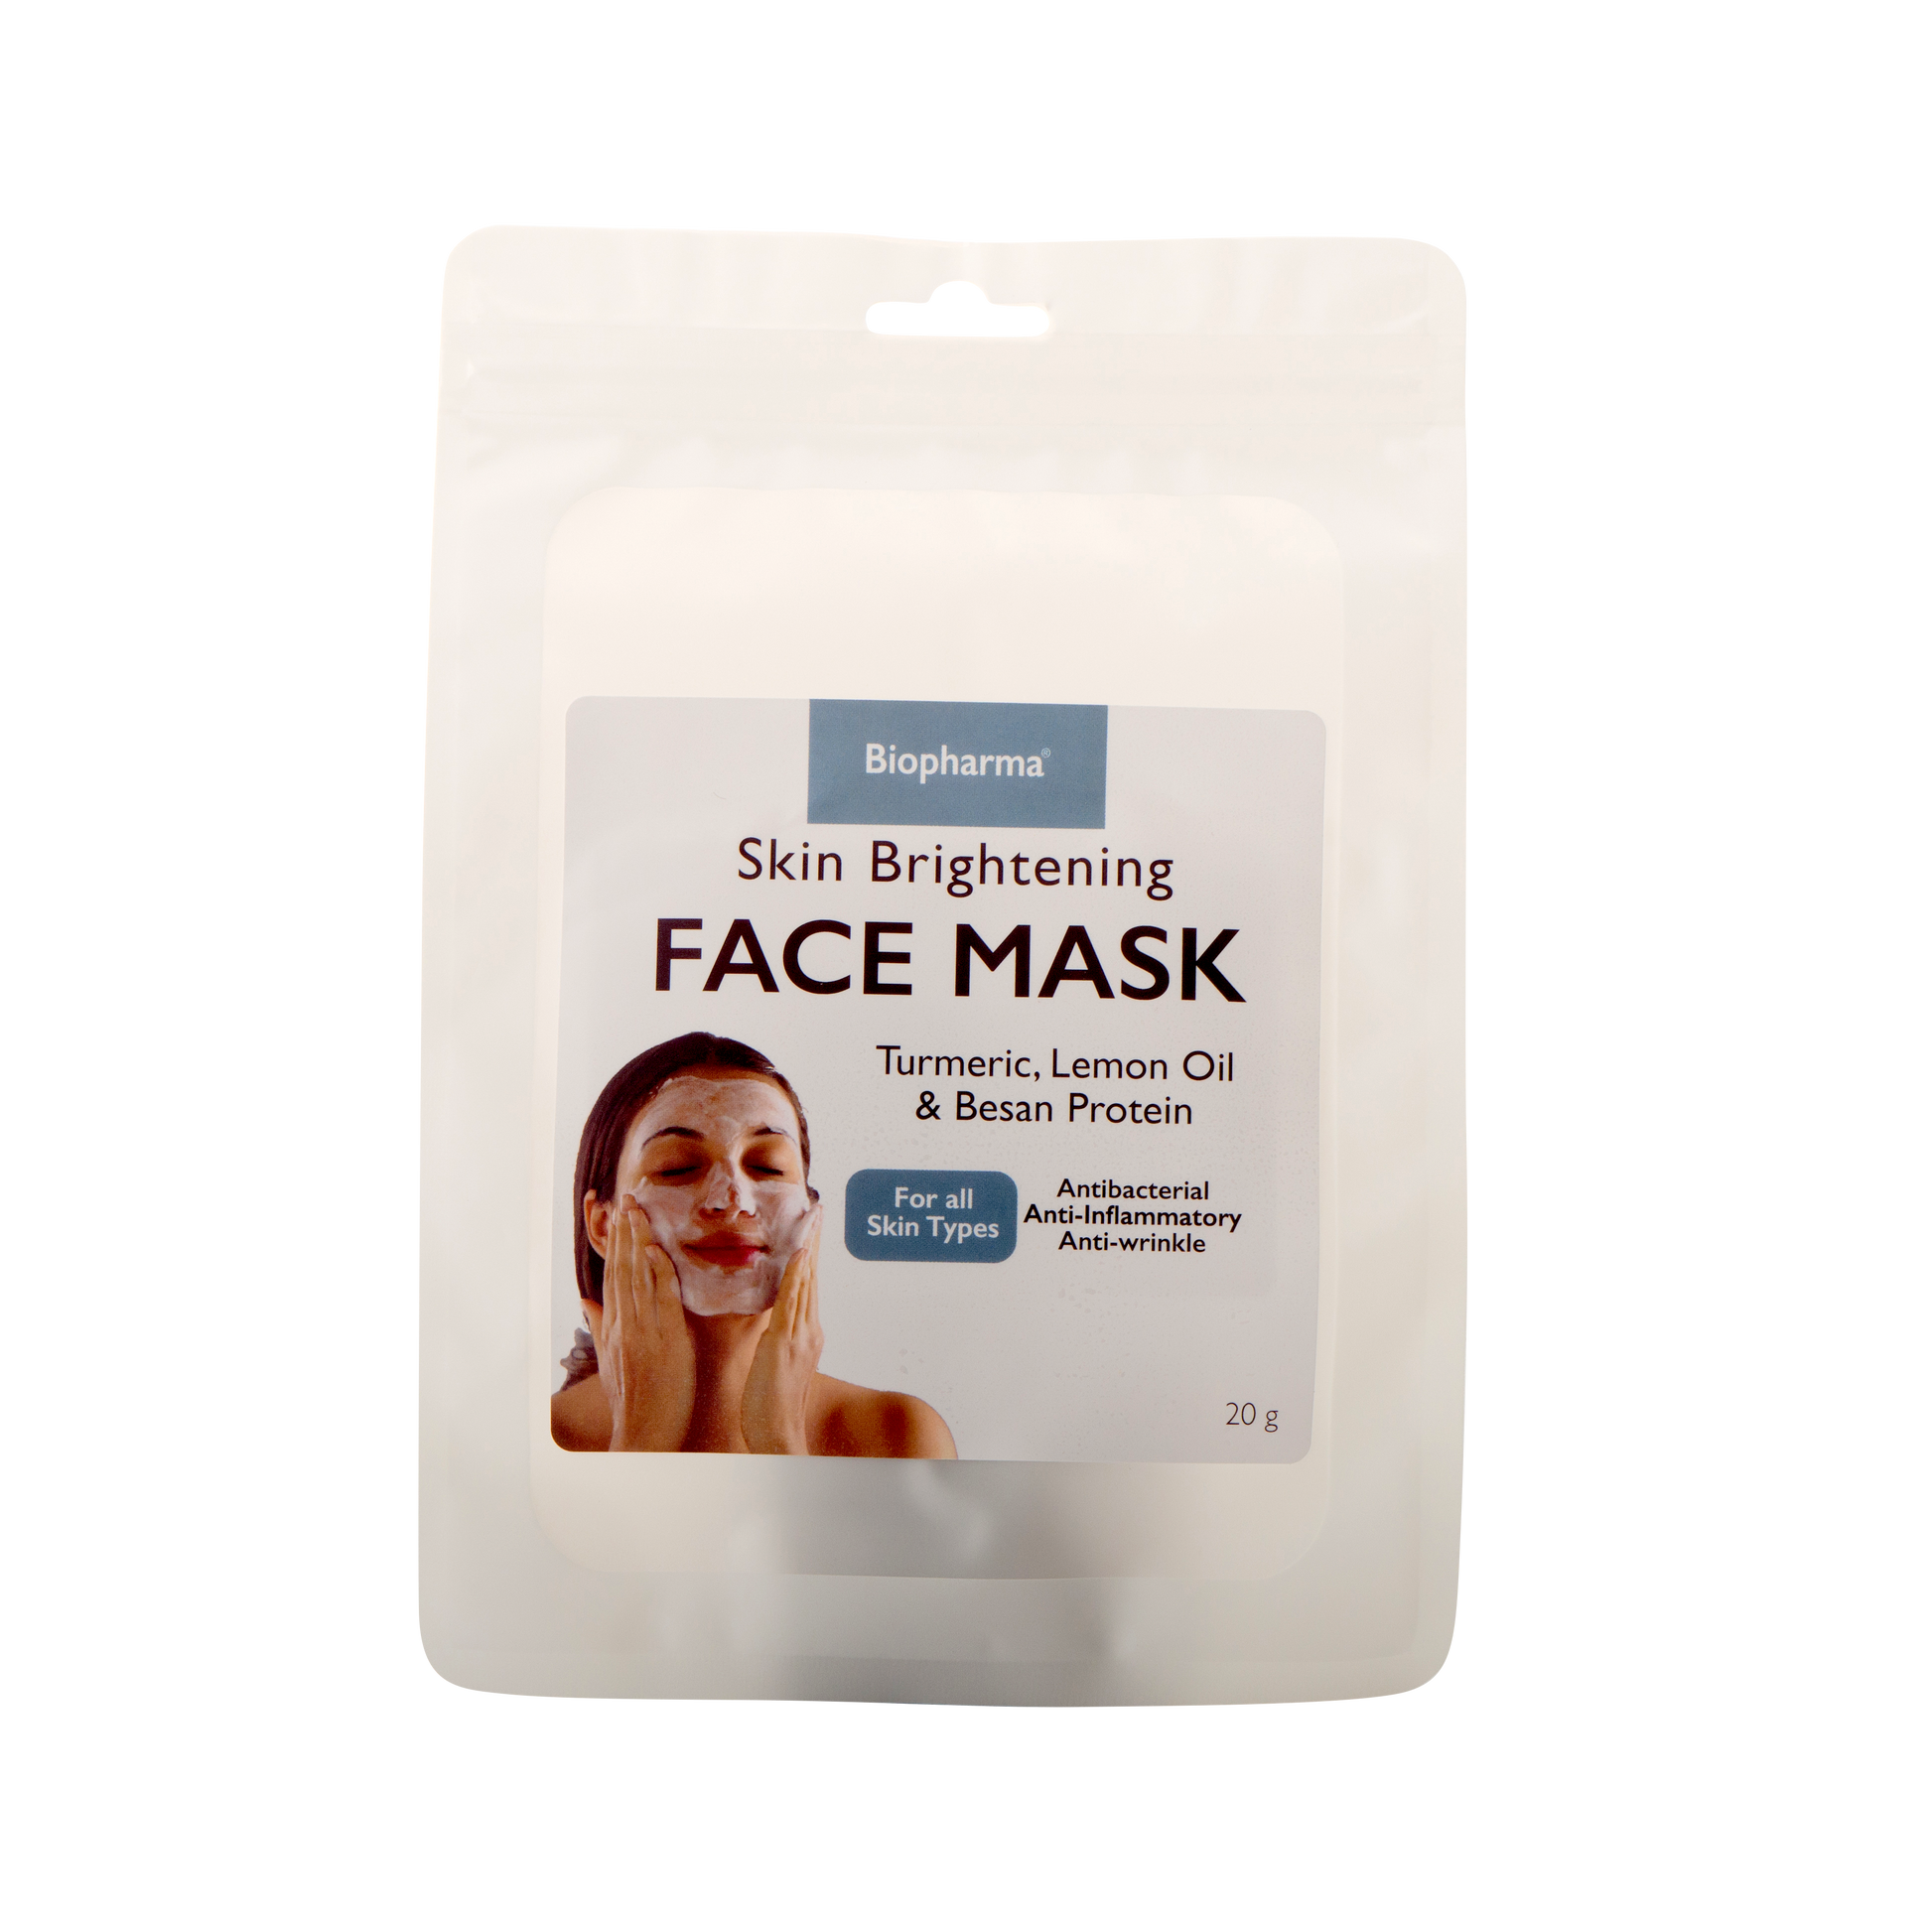 Biopharma face mask kit container